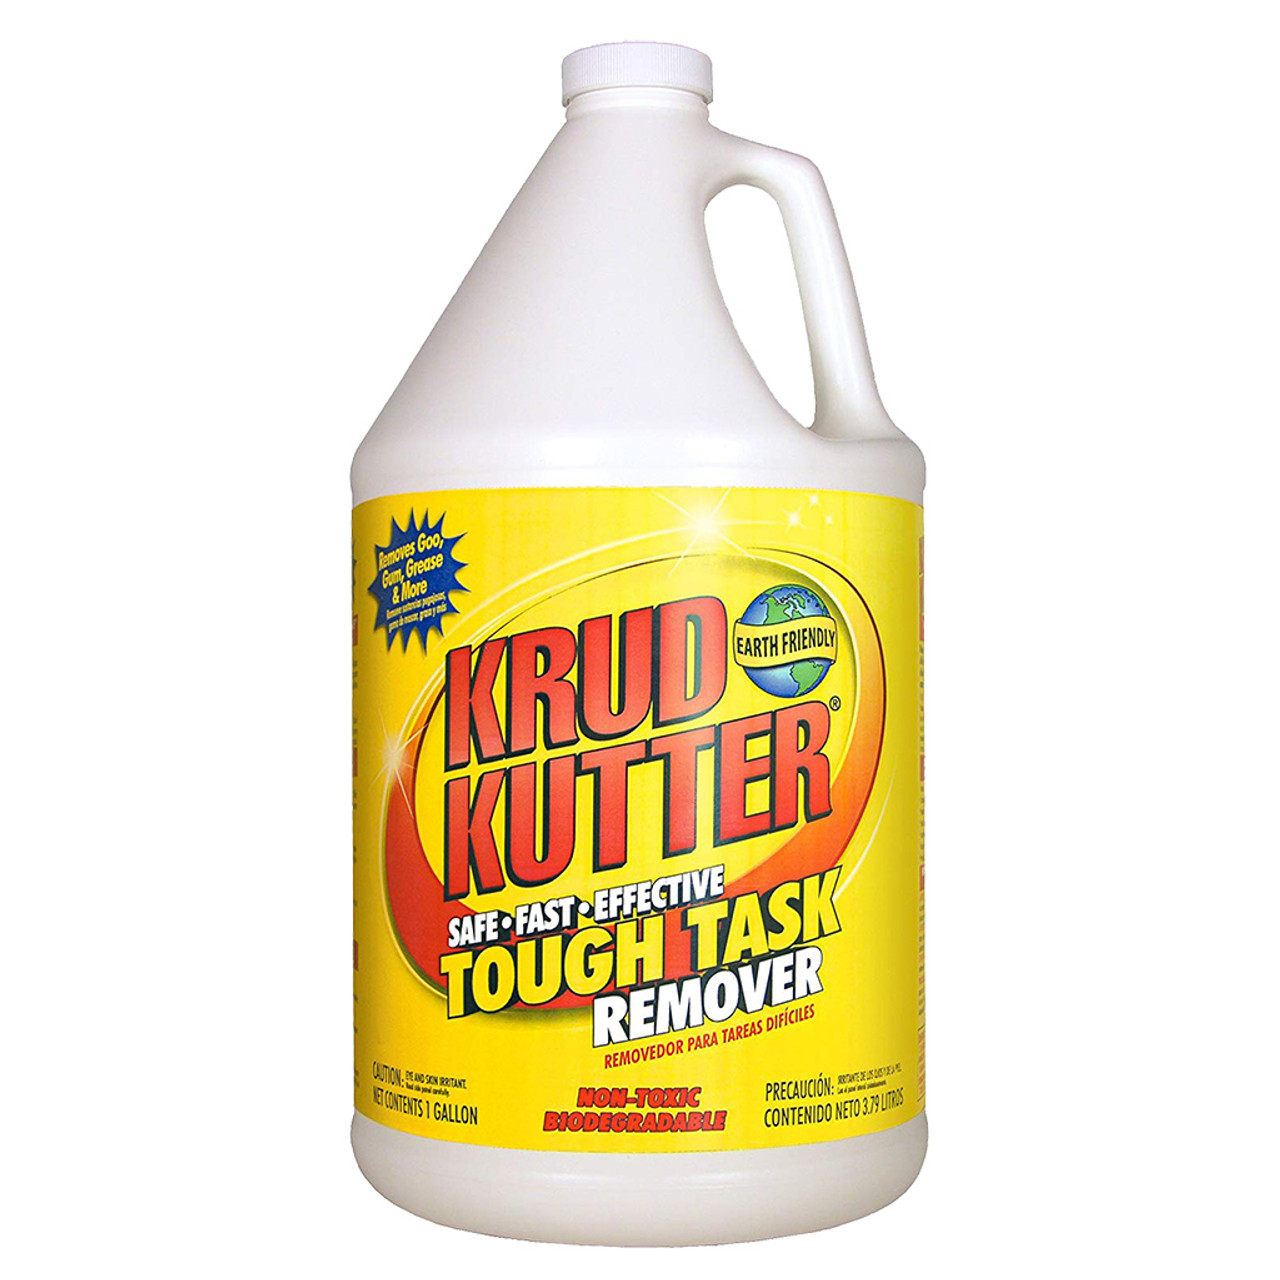 krud-kutter-tough-task-remover-1-gal-midwest-technology-products